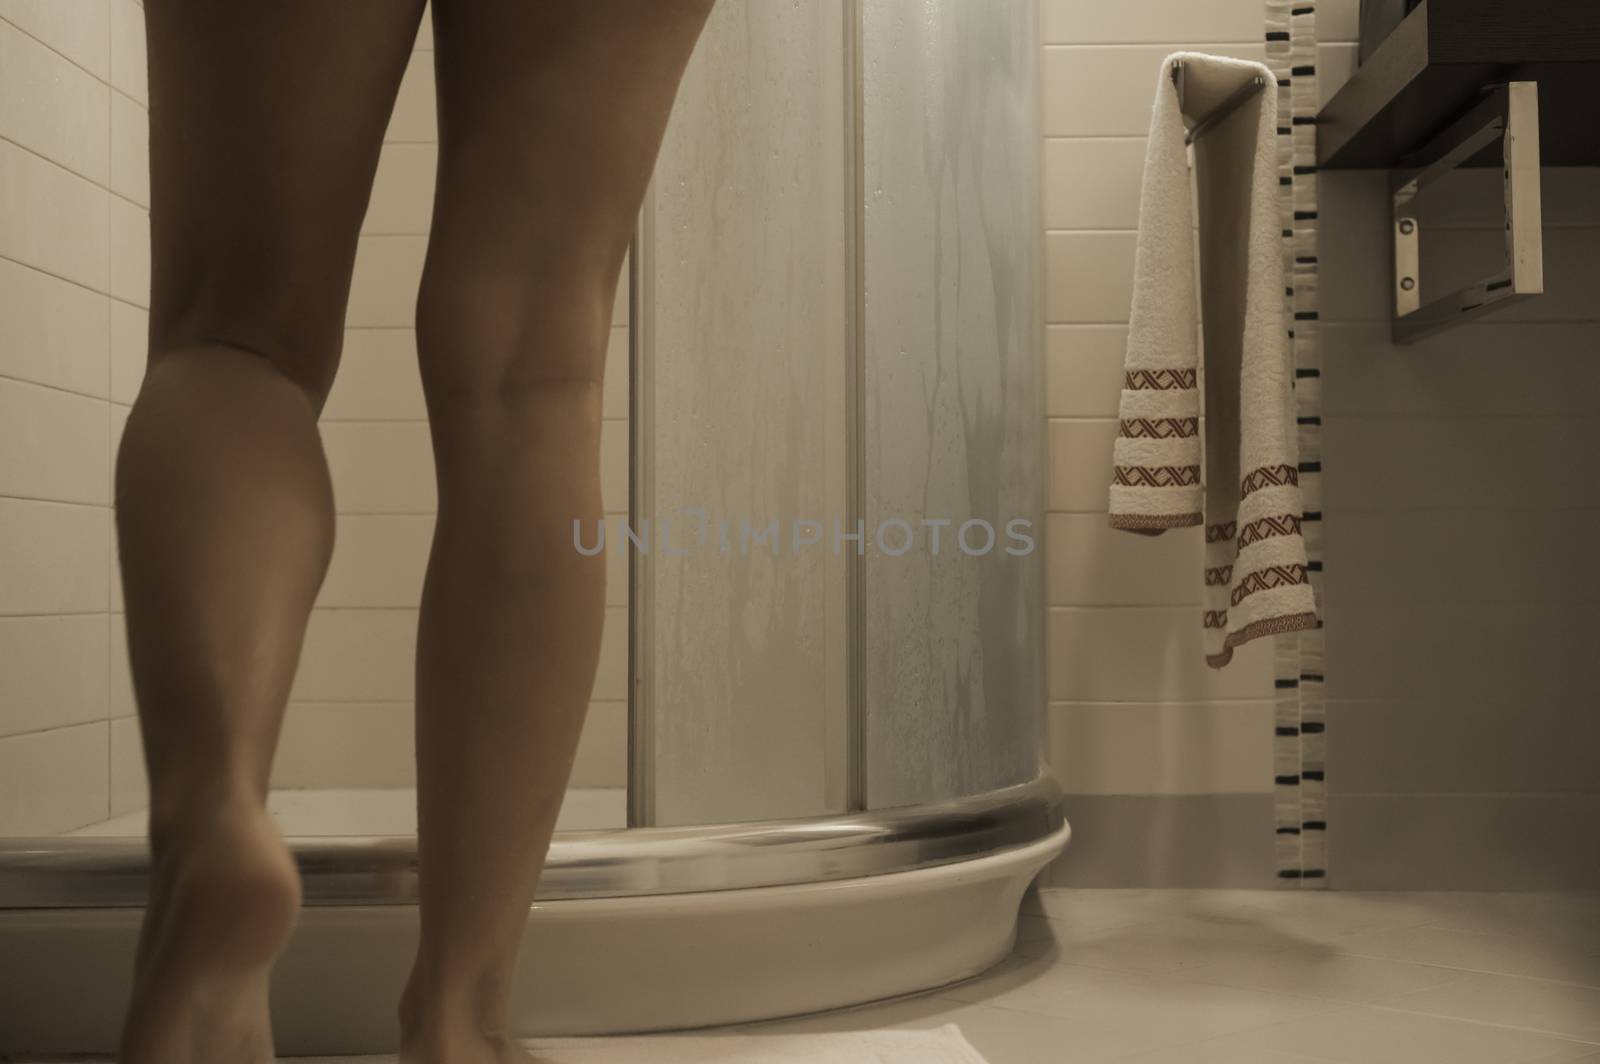 Sexy naked woman's legs entering the foggy glass shower cabin in her modern design bathroom